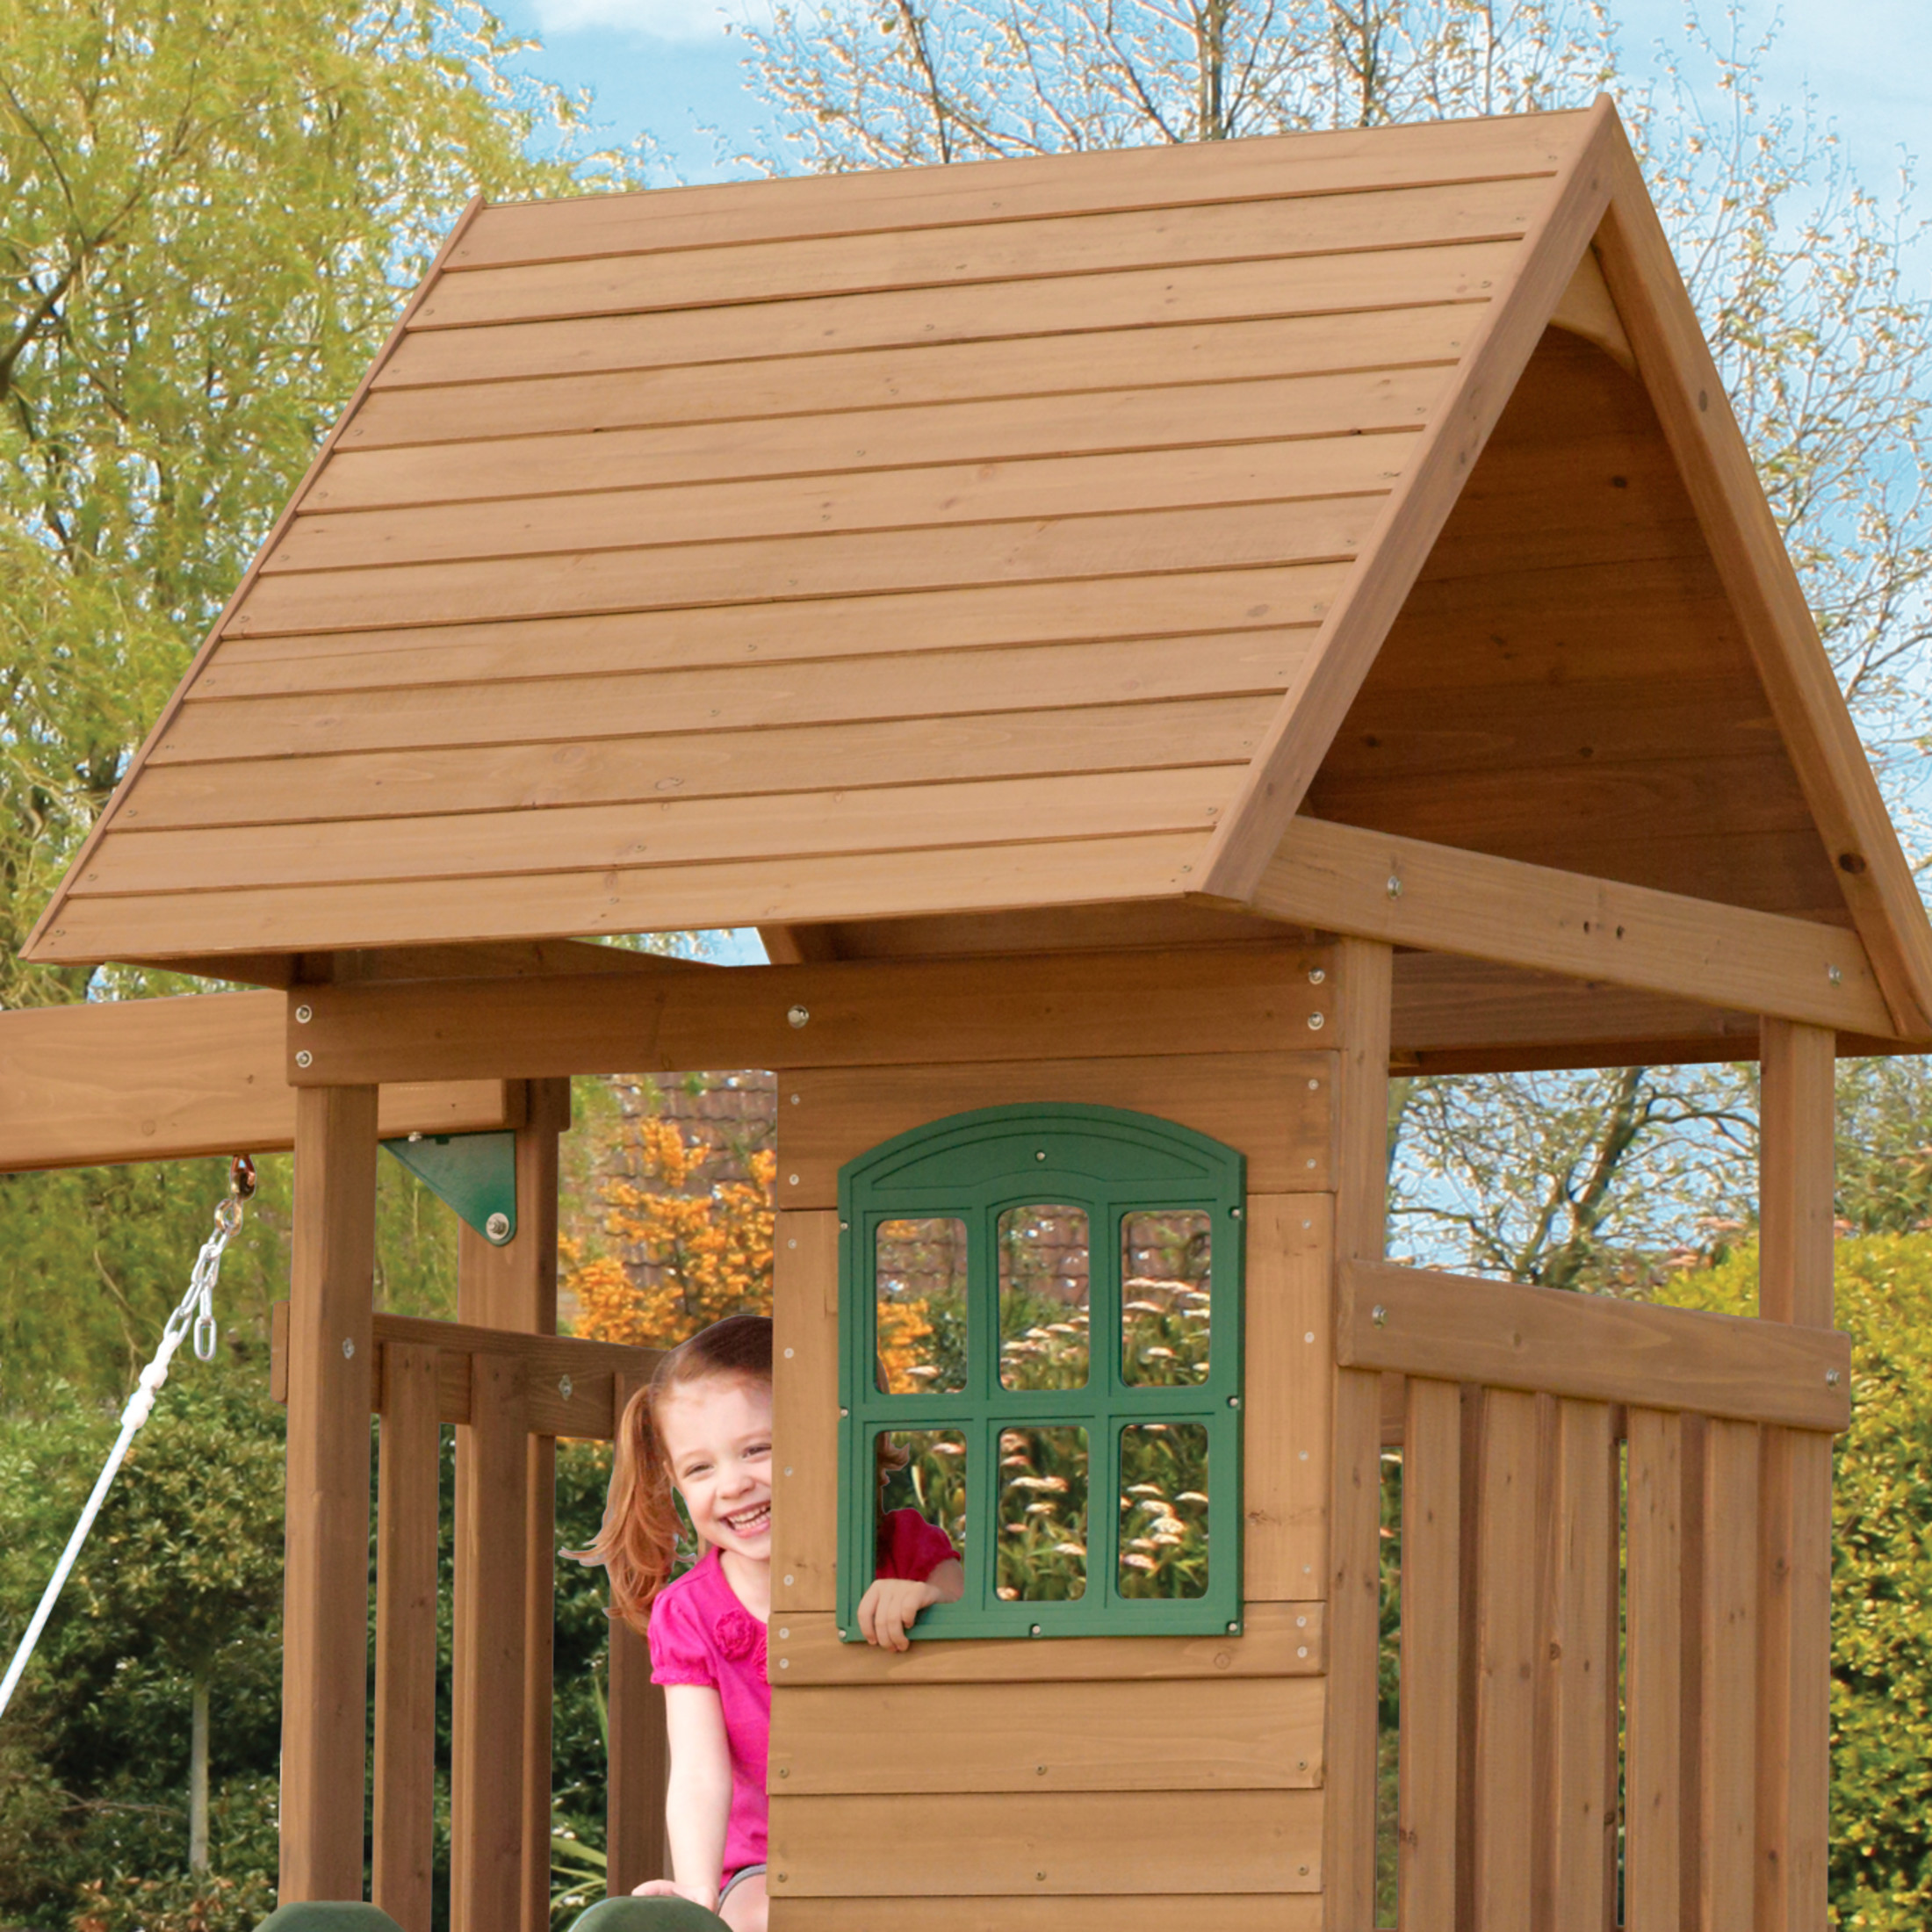 KidKraft Windale Wooden Swing Set / Playset with Clubhouse, Swings, Slide, Shaded Table and Bench - image 10 of 12